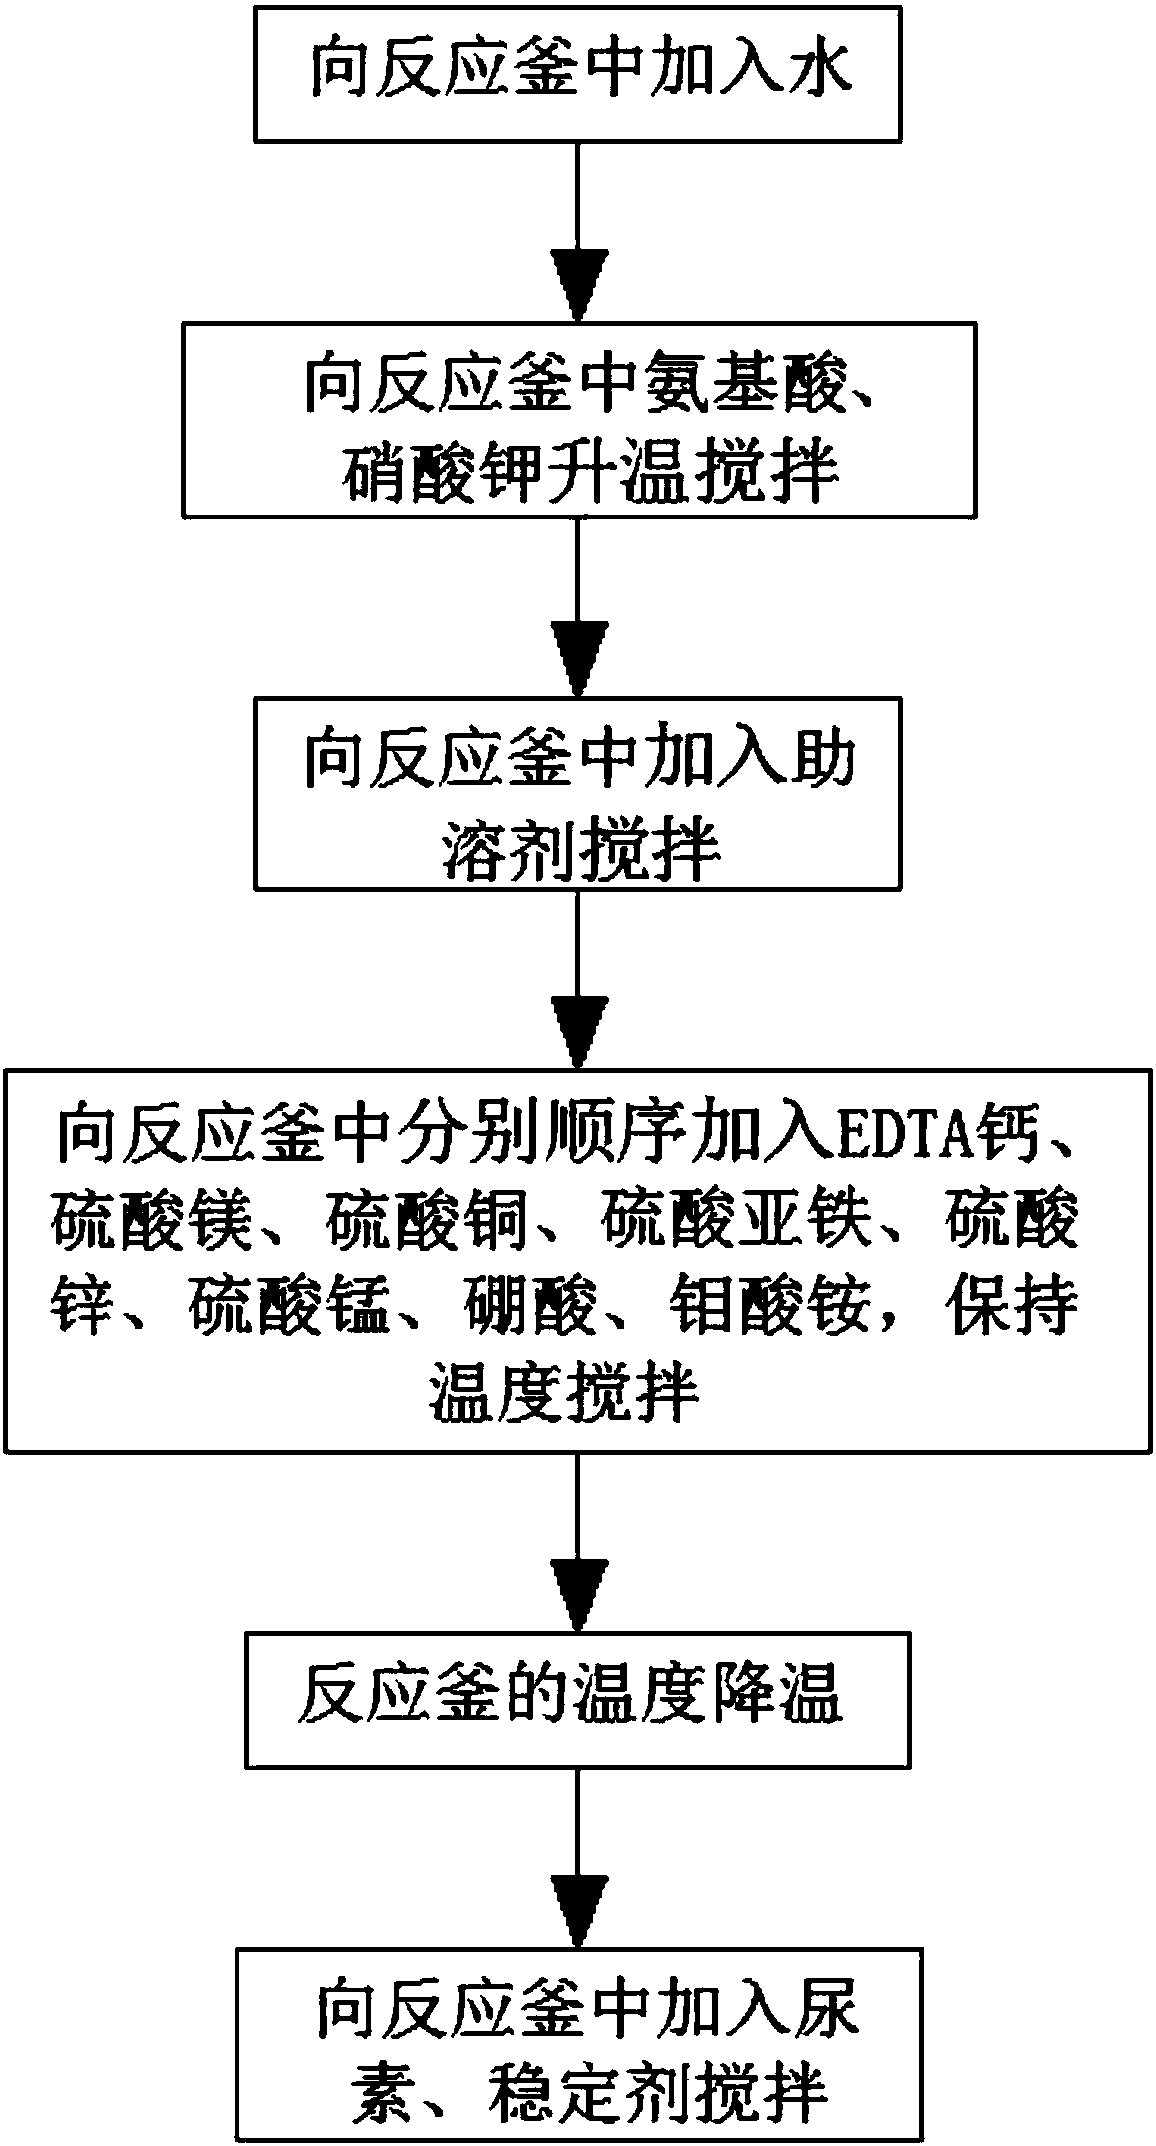 Organic water-soluble fertilizer containing ten elements and production technology thereof